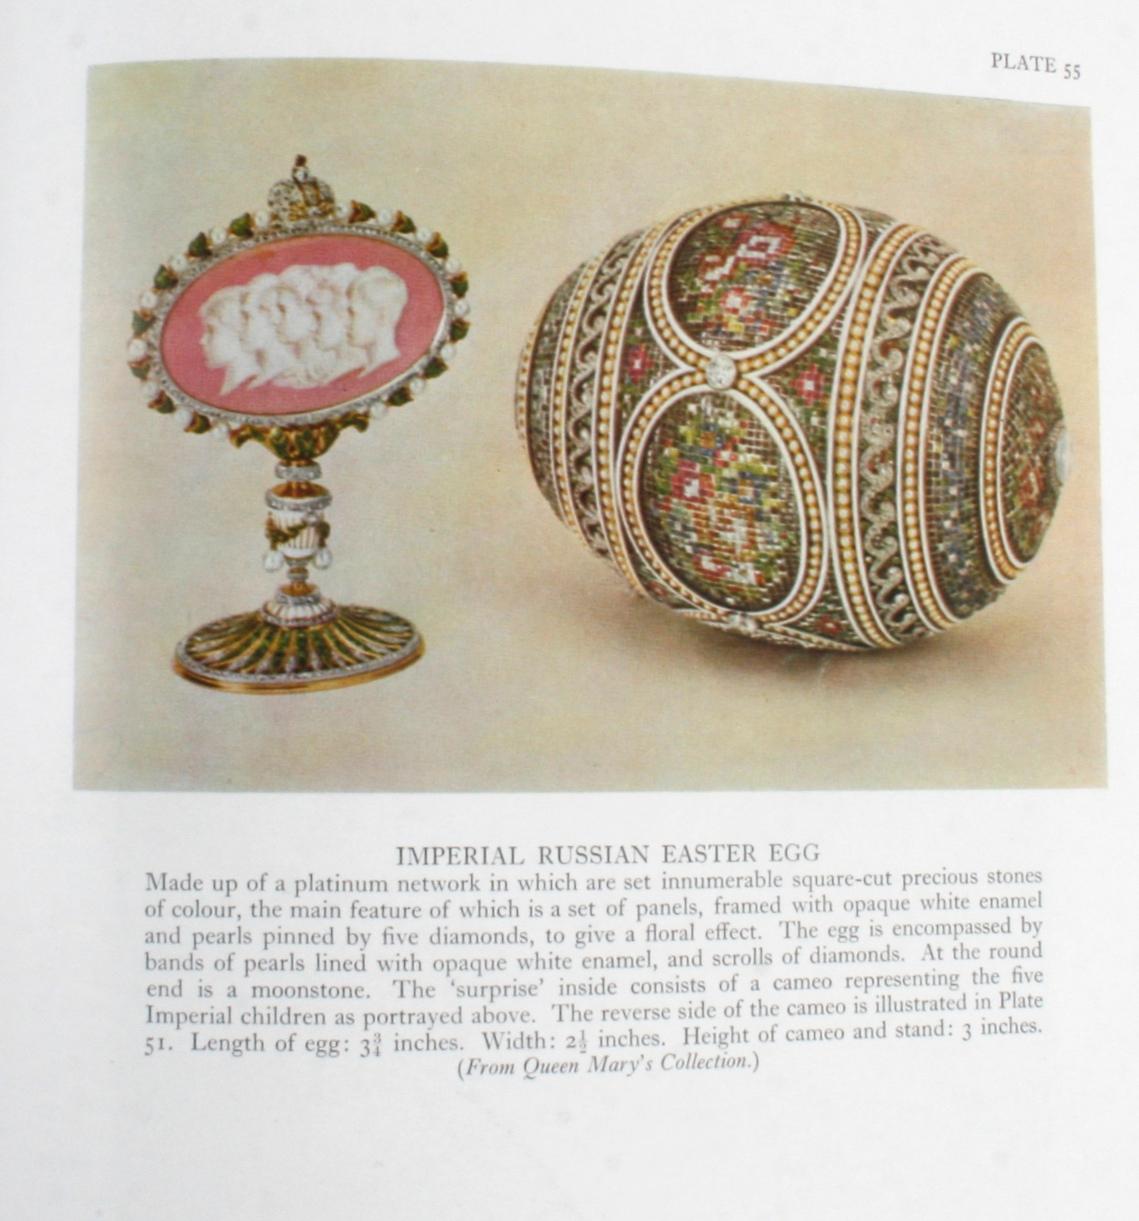 Paper Peter Carl Fabergé, His Life and Work by Henry Charles Bainbridge For Sale